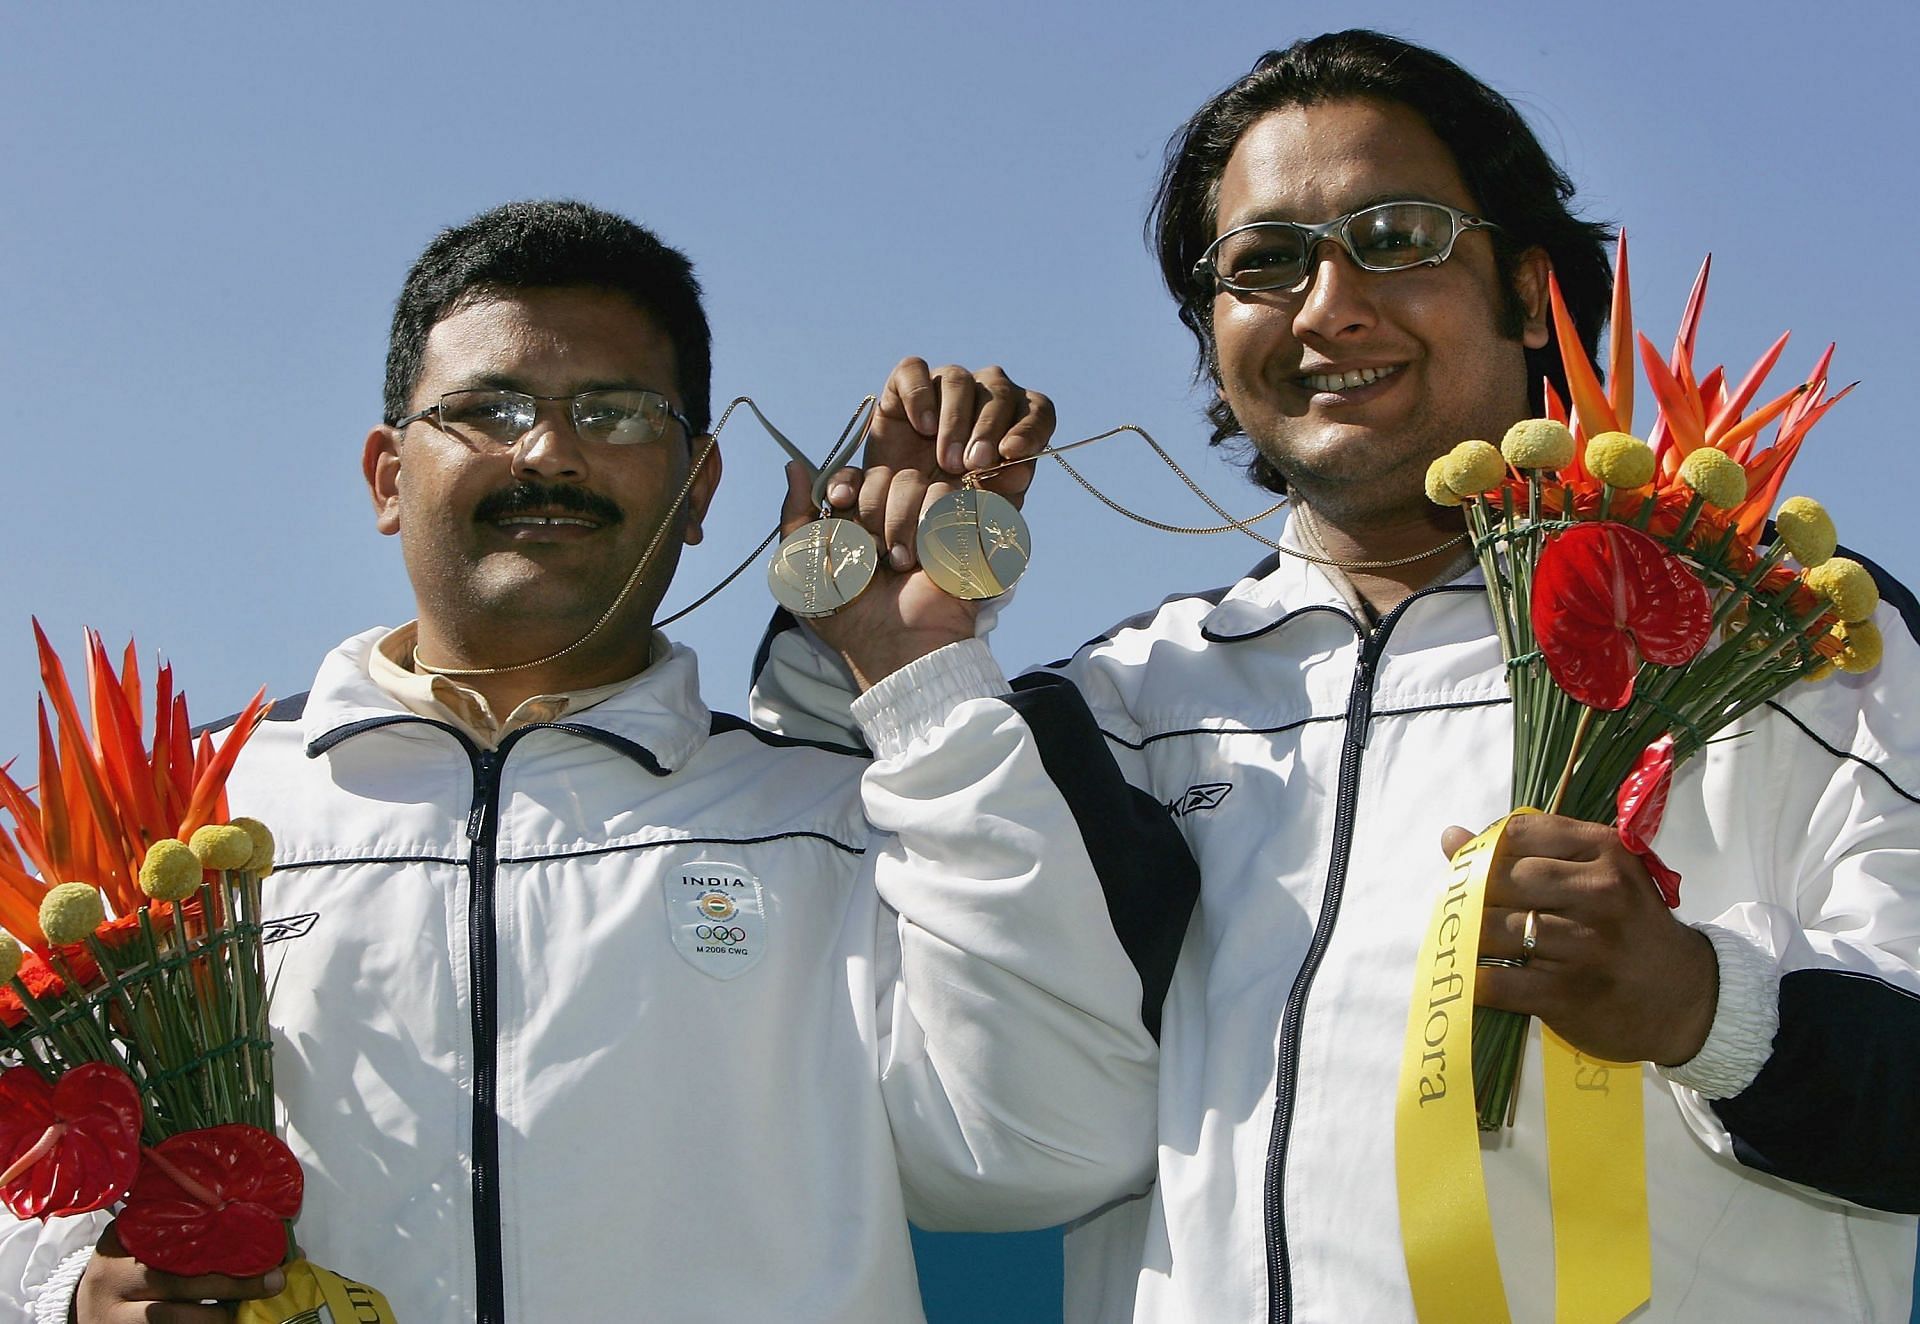 Jaspal Rana (R) and Samaresh Jung (L), won Gold Medal at Melbourne International Shooting Club in 2006. (Photo by Getty Images)